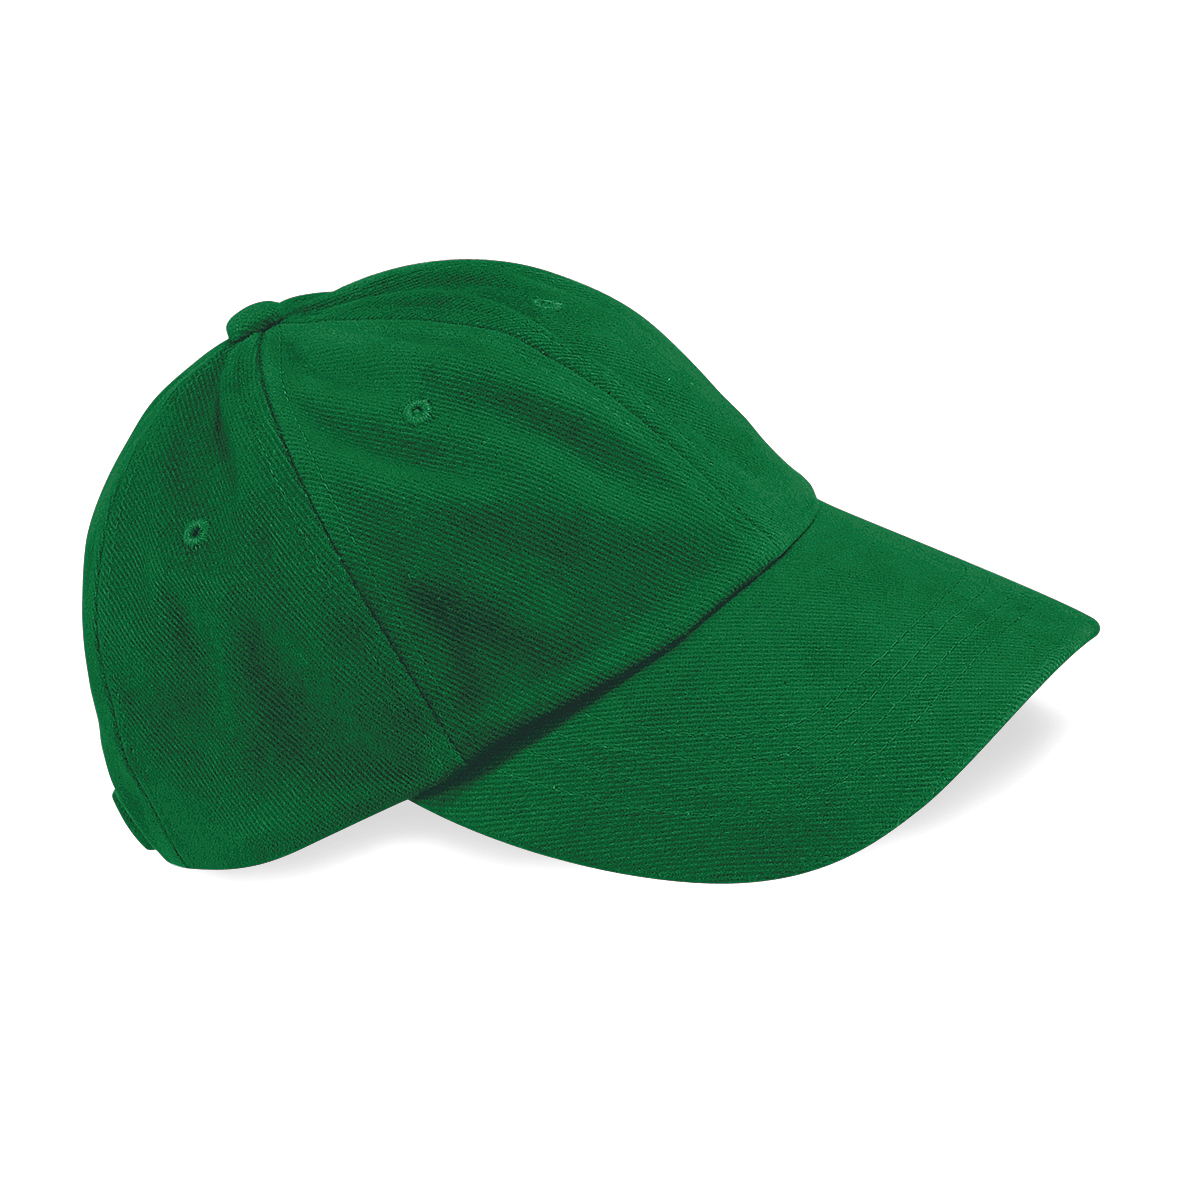 Low Profile Heavy Brushed Cotton Cap in green with green visor, eyelets and button